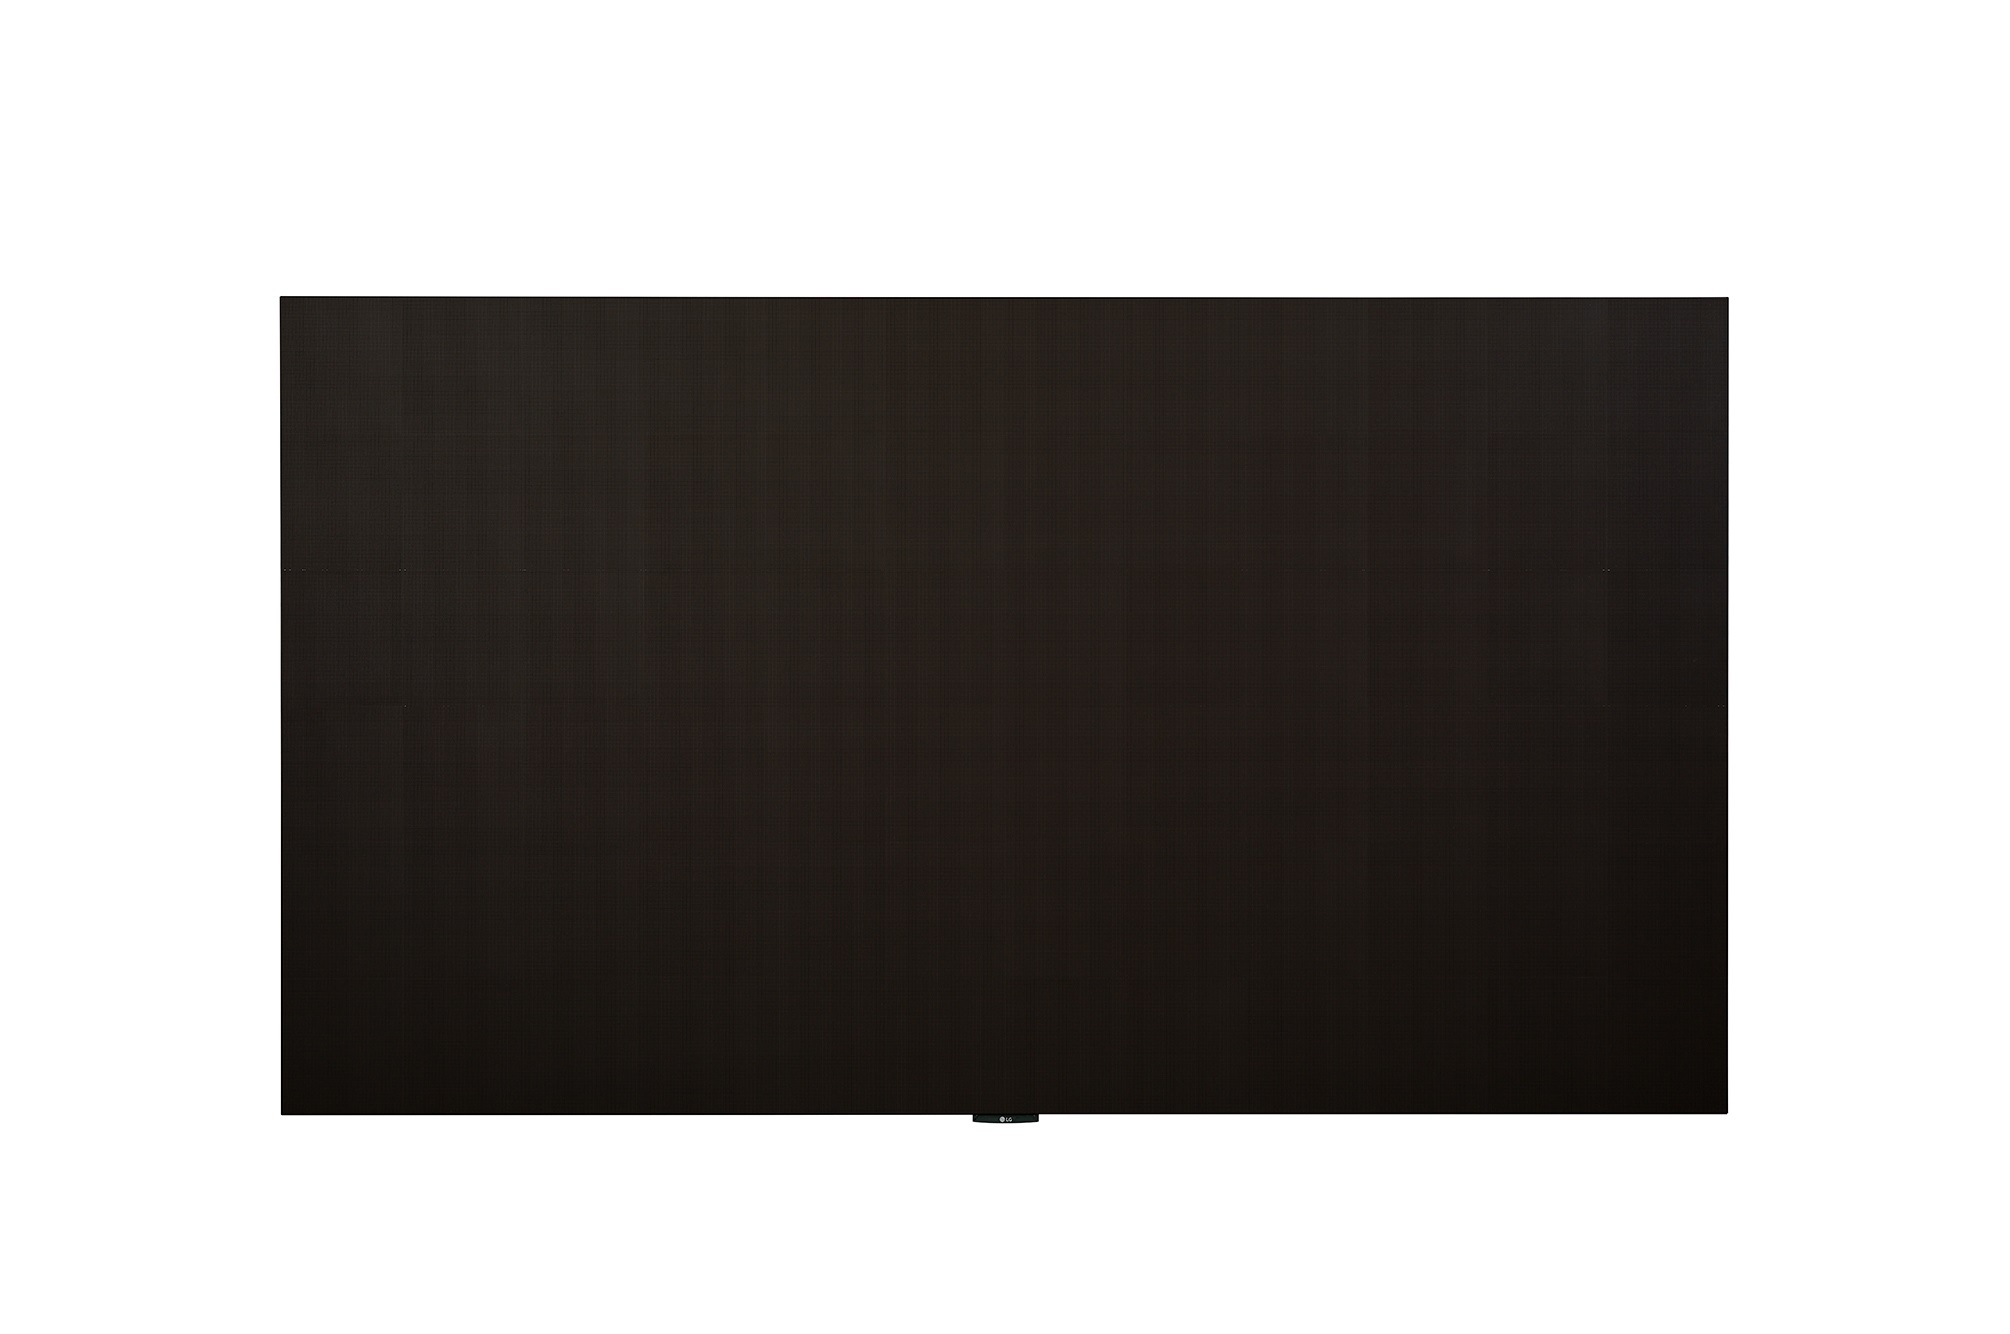 136" LG LED LAEC015 - all-in-one 